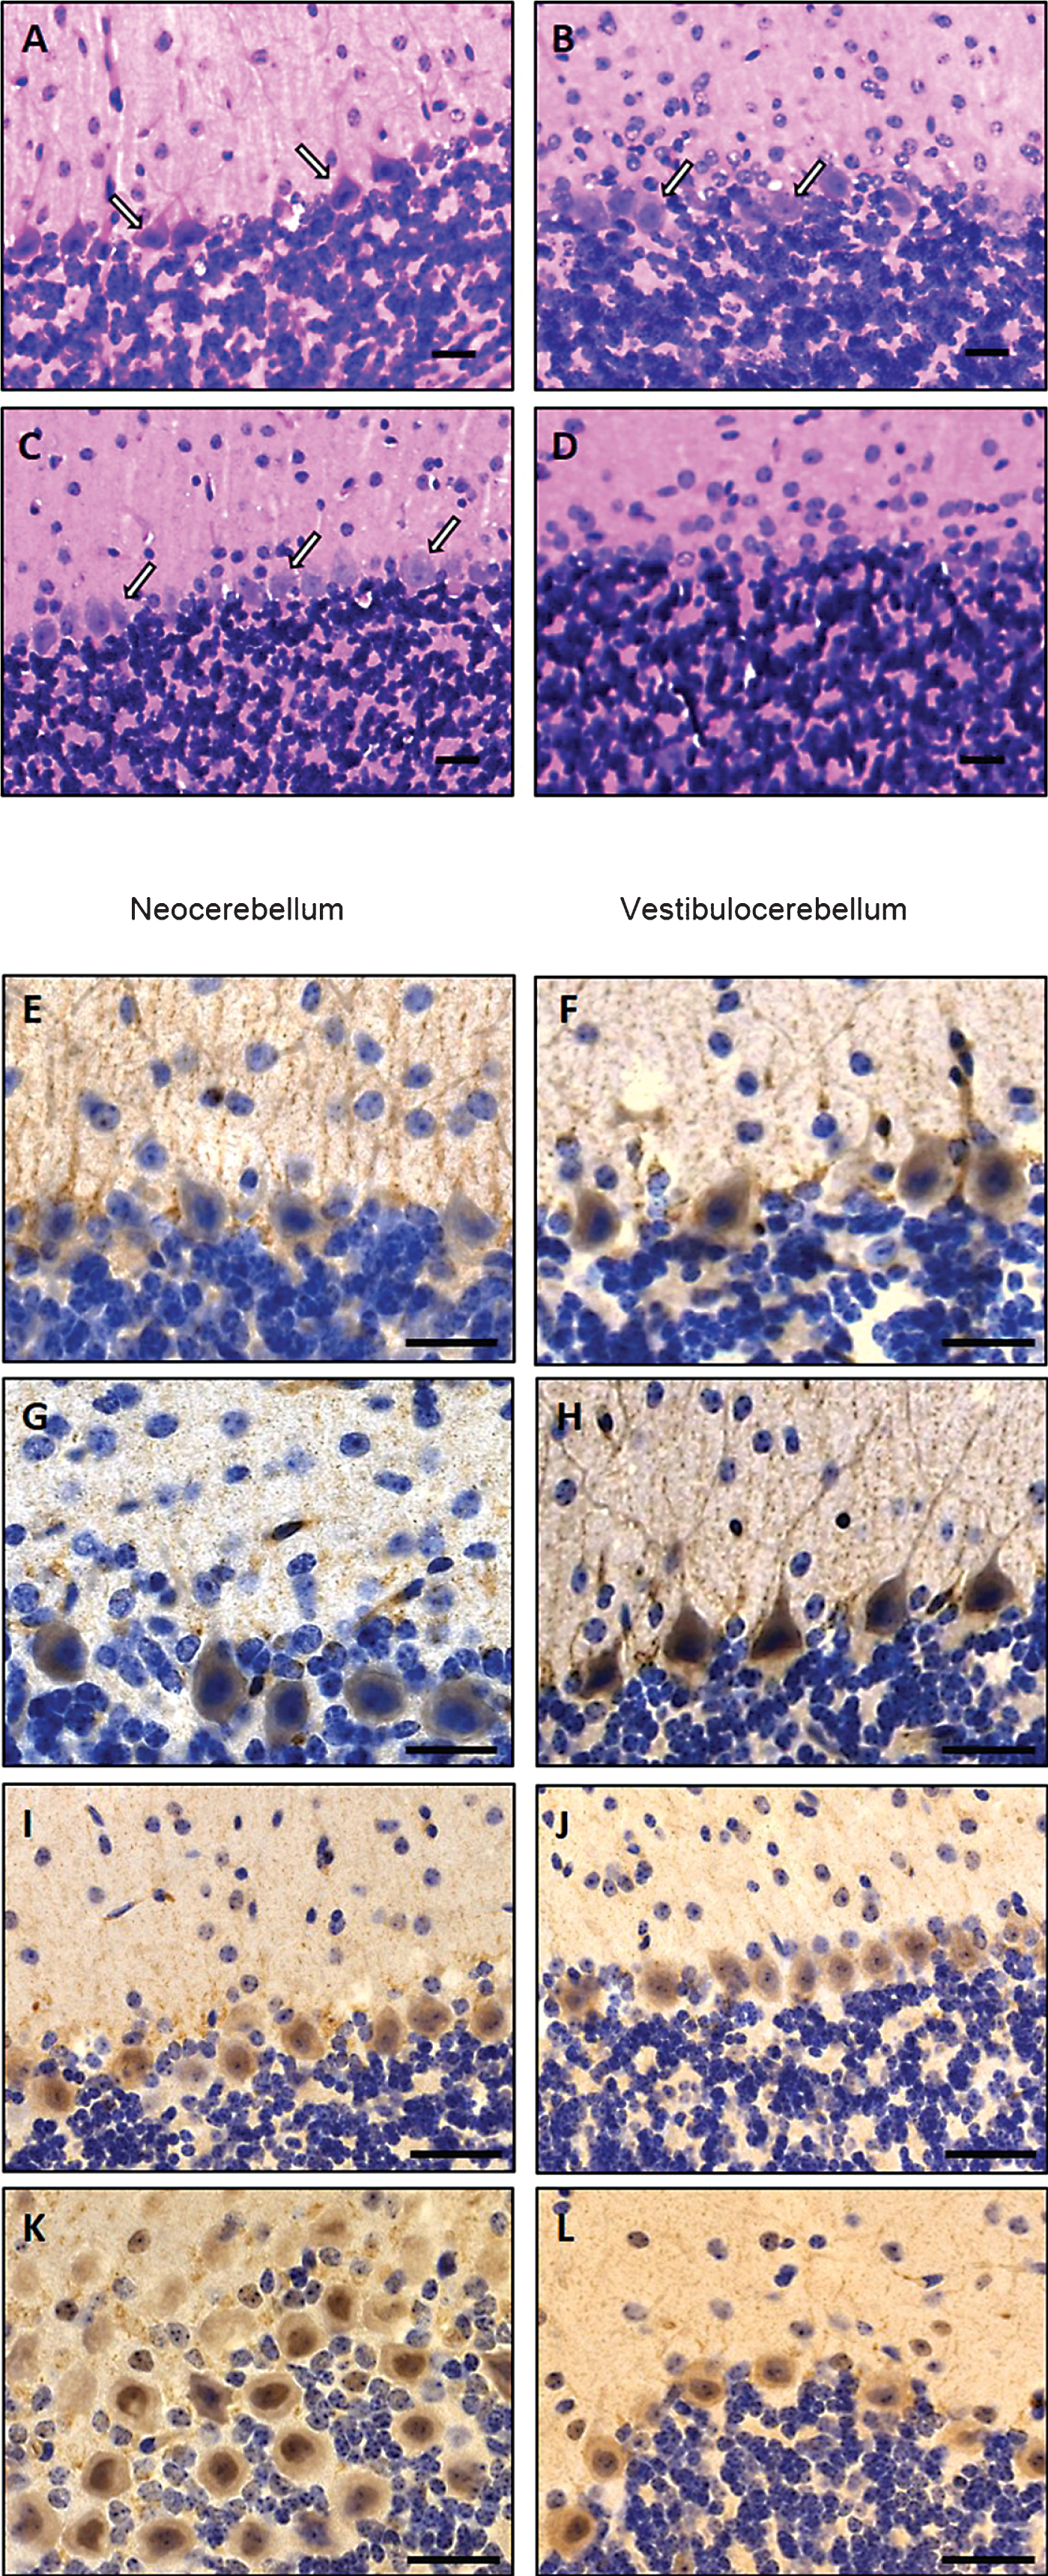 Cerebellar alterations in woozy mice. H&E: (A) Purkinje cell layer (white arrows) and absence of glial cell proliferation in a 6-week-old wild type littermate control. Scale bar = 20 μm. (B) Occasional mislocalisation of Purkinje-cells (white arrows) and proliferated (Bergmann) glial cells in a 6-week-old woozy mouse. Scale bar = 20 μm. (C) Purkinje-cell layer (white arrows) and absence of glial cell proliferation in a 26-week-old wild type littermate control. Scale bar = 20 μm. (D) Complete loss of Purkinje cells in a 26-week-old woozy animal. Scale bar = 15 μm. Immunohistochemistry: (E–L) Purkinje cells in the neo- and vestibulocerebellum of 6 weeks (E, G, I and K) and 26 weeks (F, H, J and L) old wildtype animals show enrichment of BCL2 in dendrites (E–H). Sil1-mutant Purkinje cells show decreased immunoreactivity in the neocerebellum (degenerating cells, G), but increased reactivity in Purkinje cells of the non-vulnerable vestibulocerebellum (surviving cells, H). (I–L) Investigation of PARP1 in Purkinje cells of woozy revealed increased immunoreactivity in the nuclei of neocerebellar Purkinje cells (K) but not in vestibulocerebellar Purkinje cells (L) compared to wildtype animals (I, J).